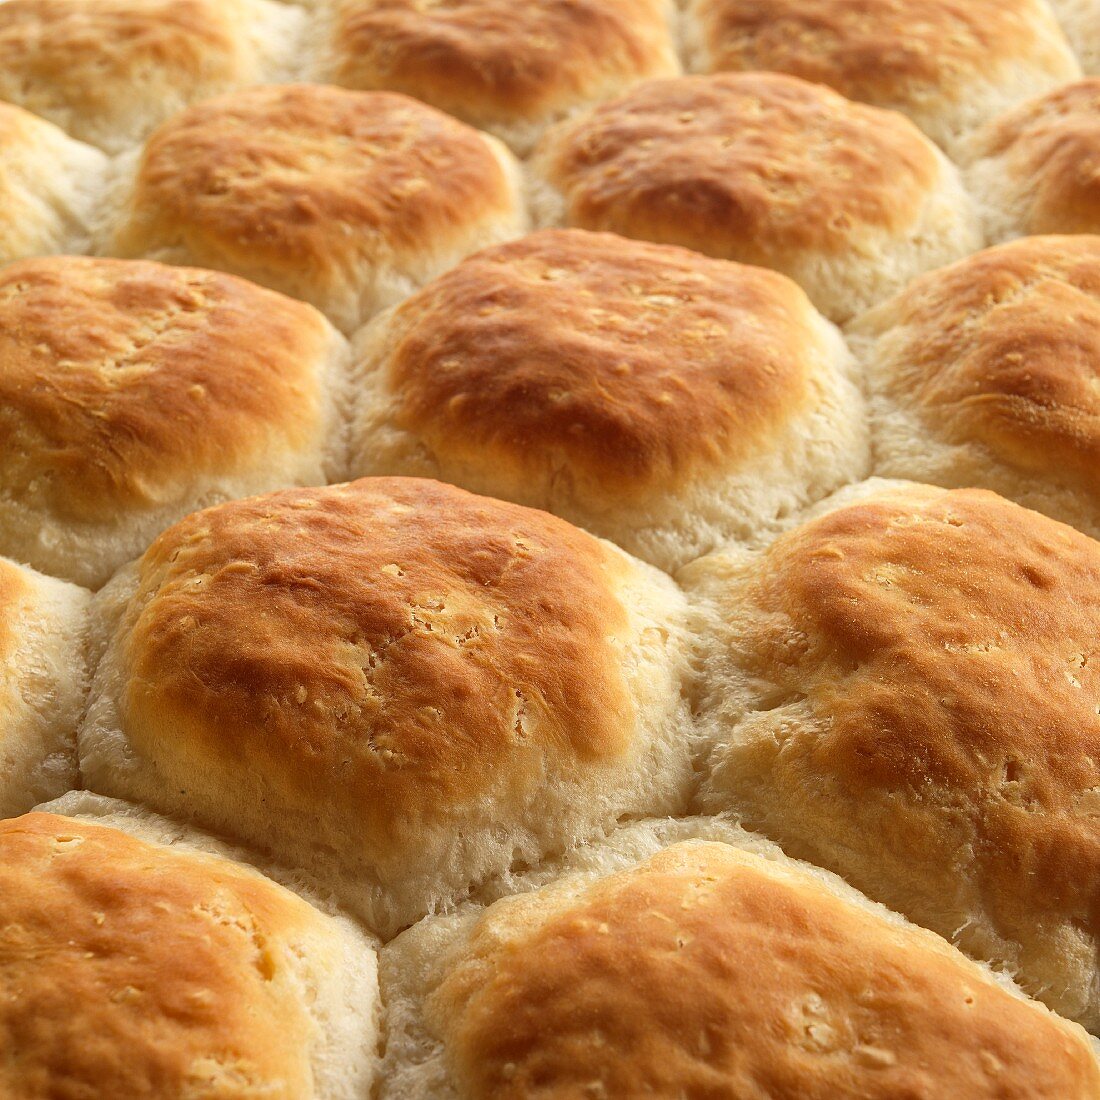 Freshly baked American biscuits in a pan (close-up)